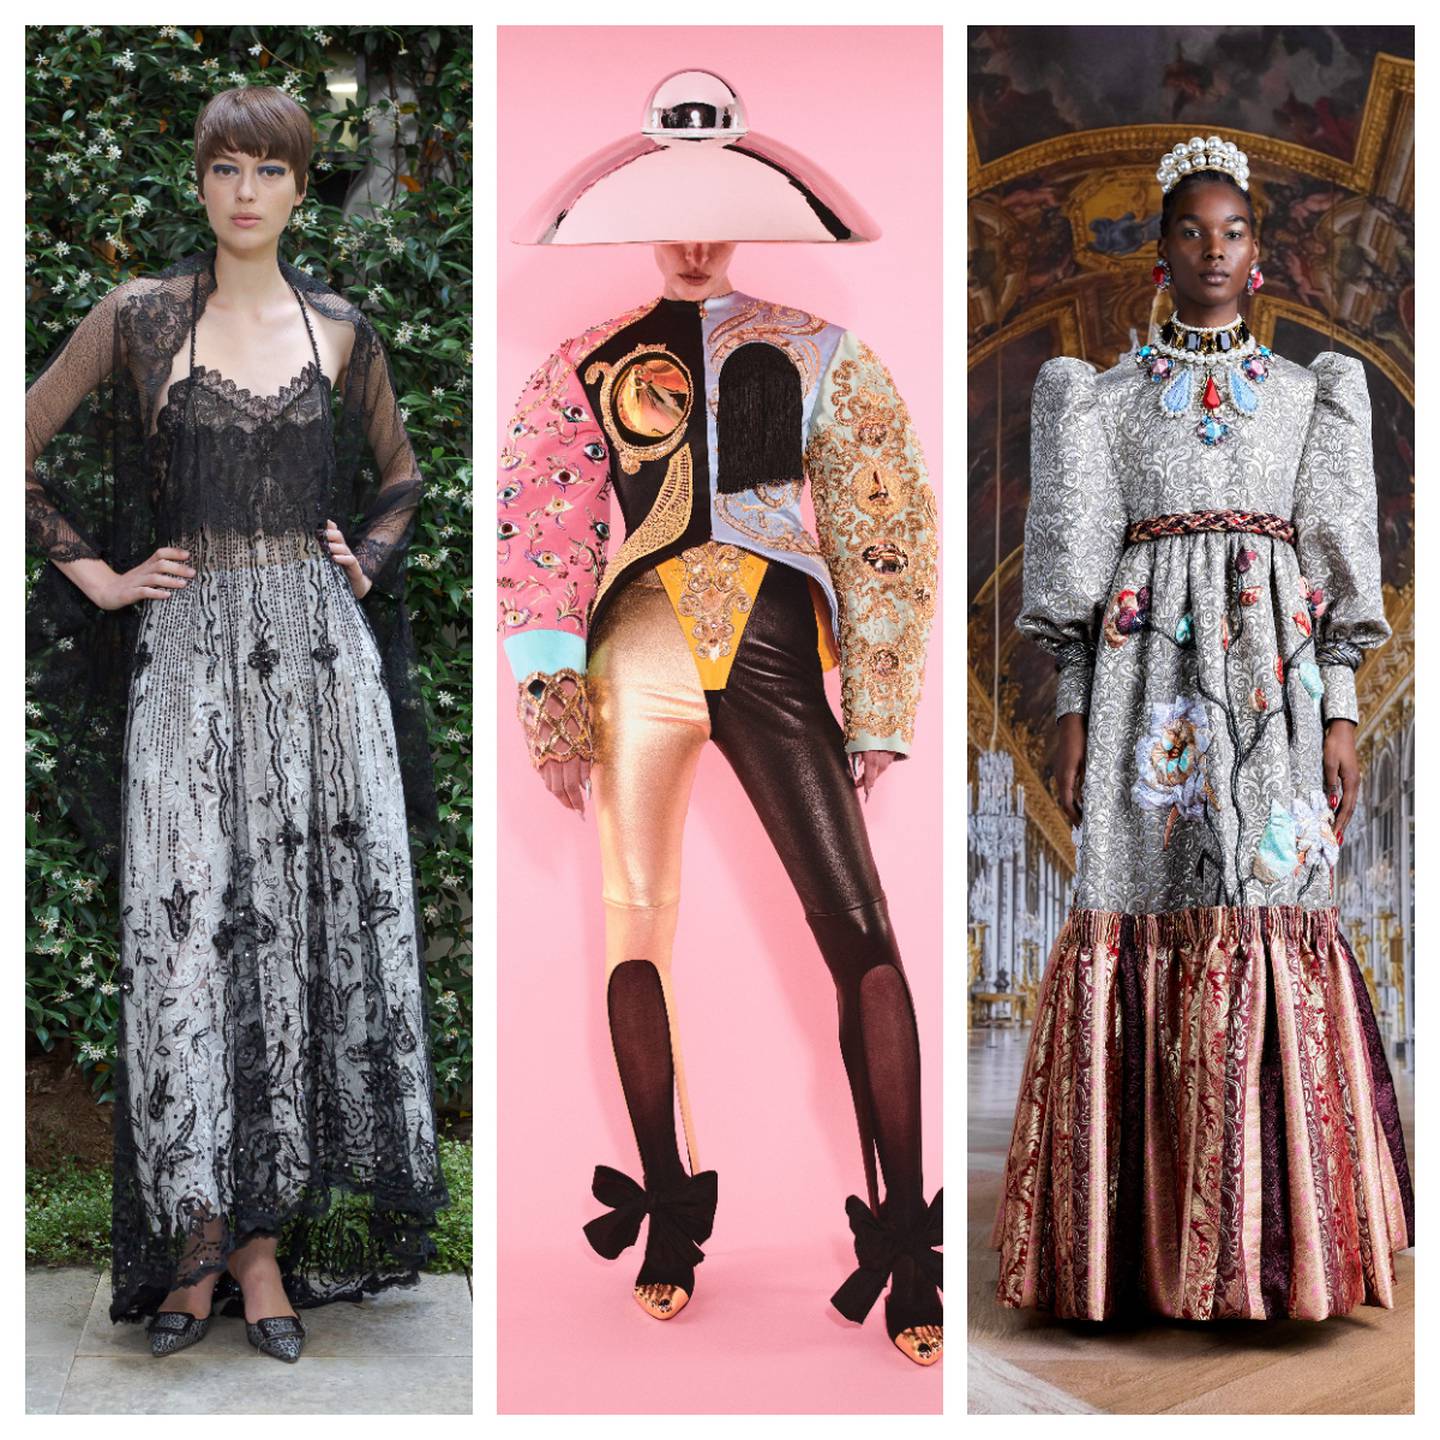 Recycling reached new heights at couture, with Julie de Libran using vintage fabric, while both Schiaparelli and Viktor & Rolf patchworked dead stock